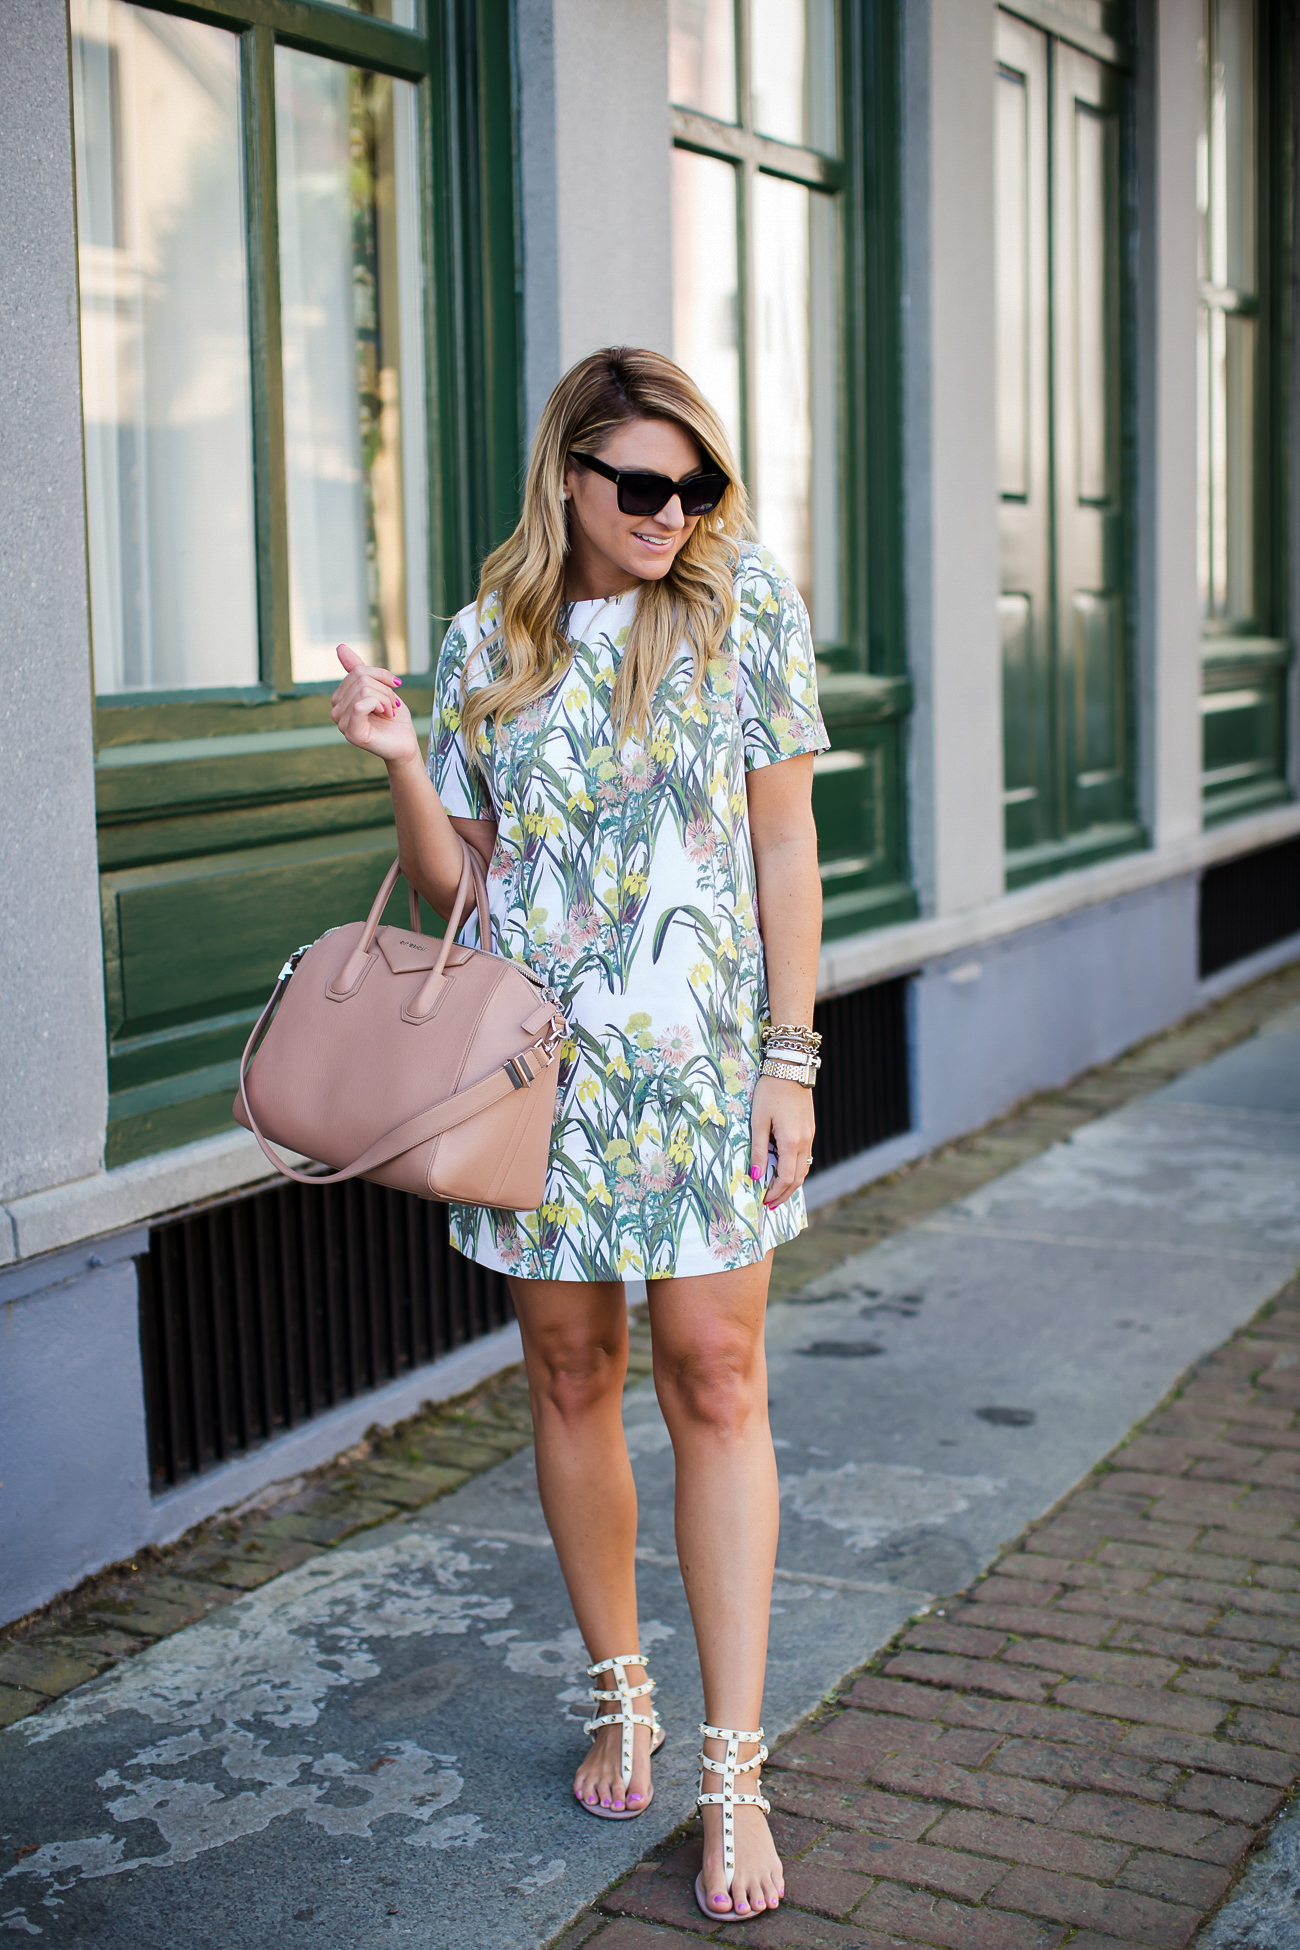 Revolve Floral Dress Charleston South Carolina What to Wear_-2 - SHOP DANDY  | A florida based style and beauty blog by Danielle